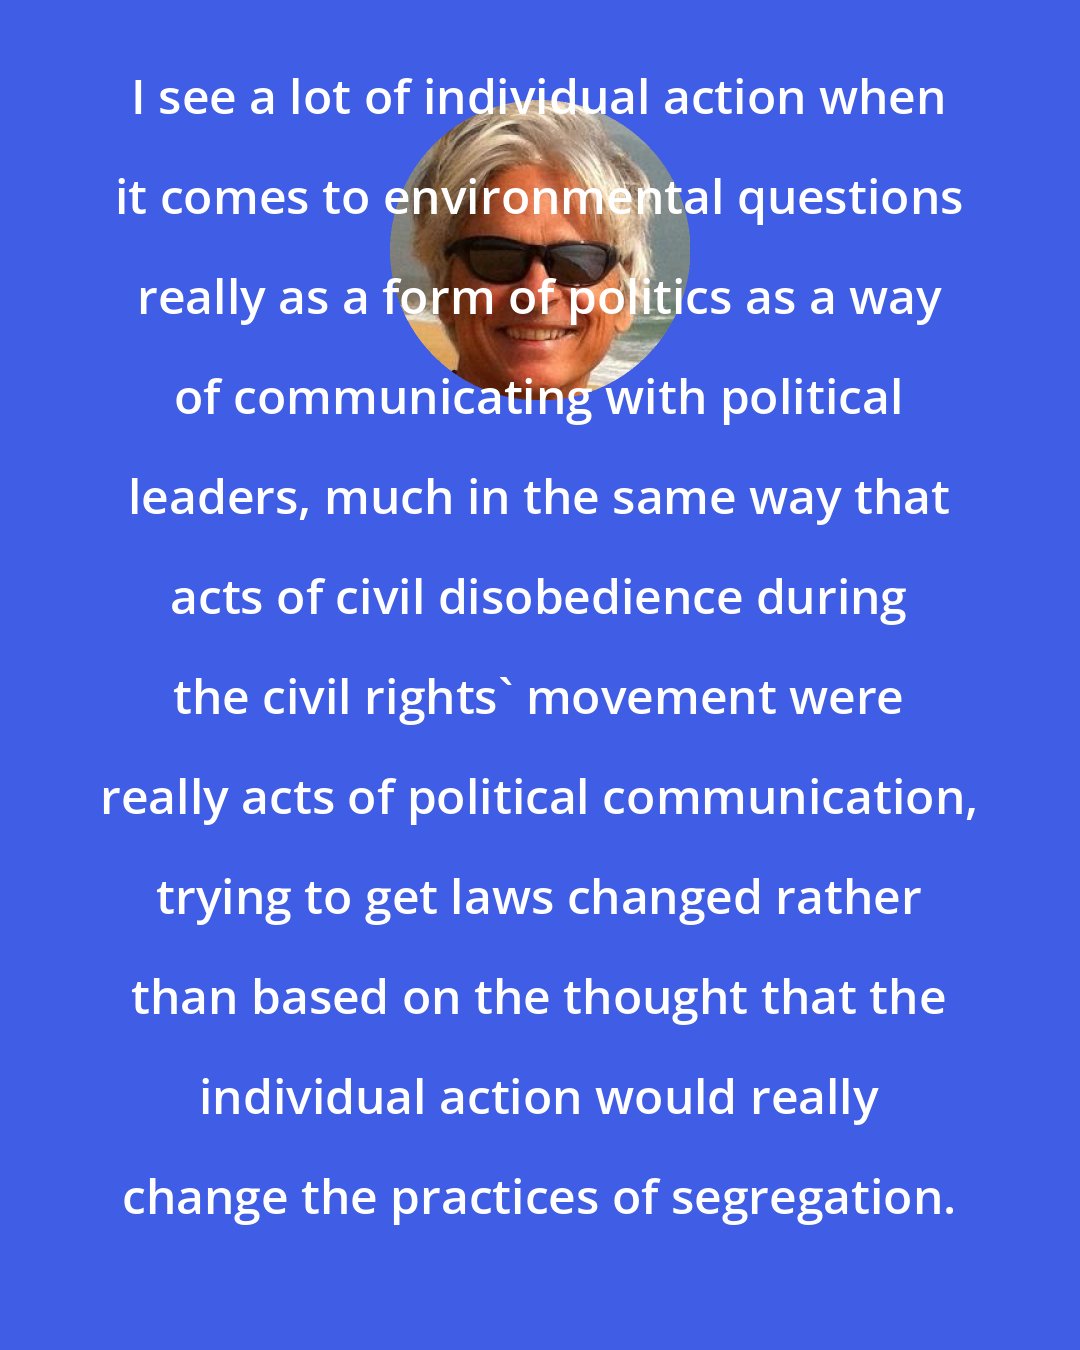 Dale Jamieson: I see a lot of individual action when it comes to environmental questions really as a form of politics as a way of communicating with political leaders, much in the same way that acts of civil disobedience during the civil rights' movement were really acts of political communication, trying to get laws changed rather than based on the thought that the individual action would really change the practices of segregation.